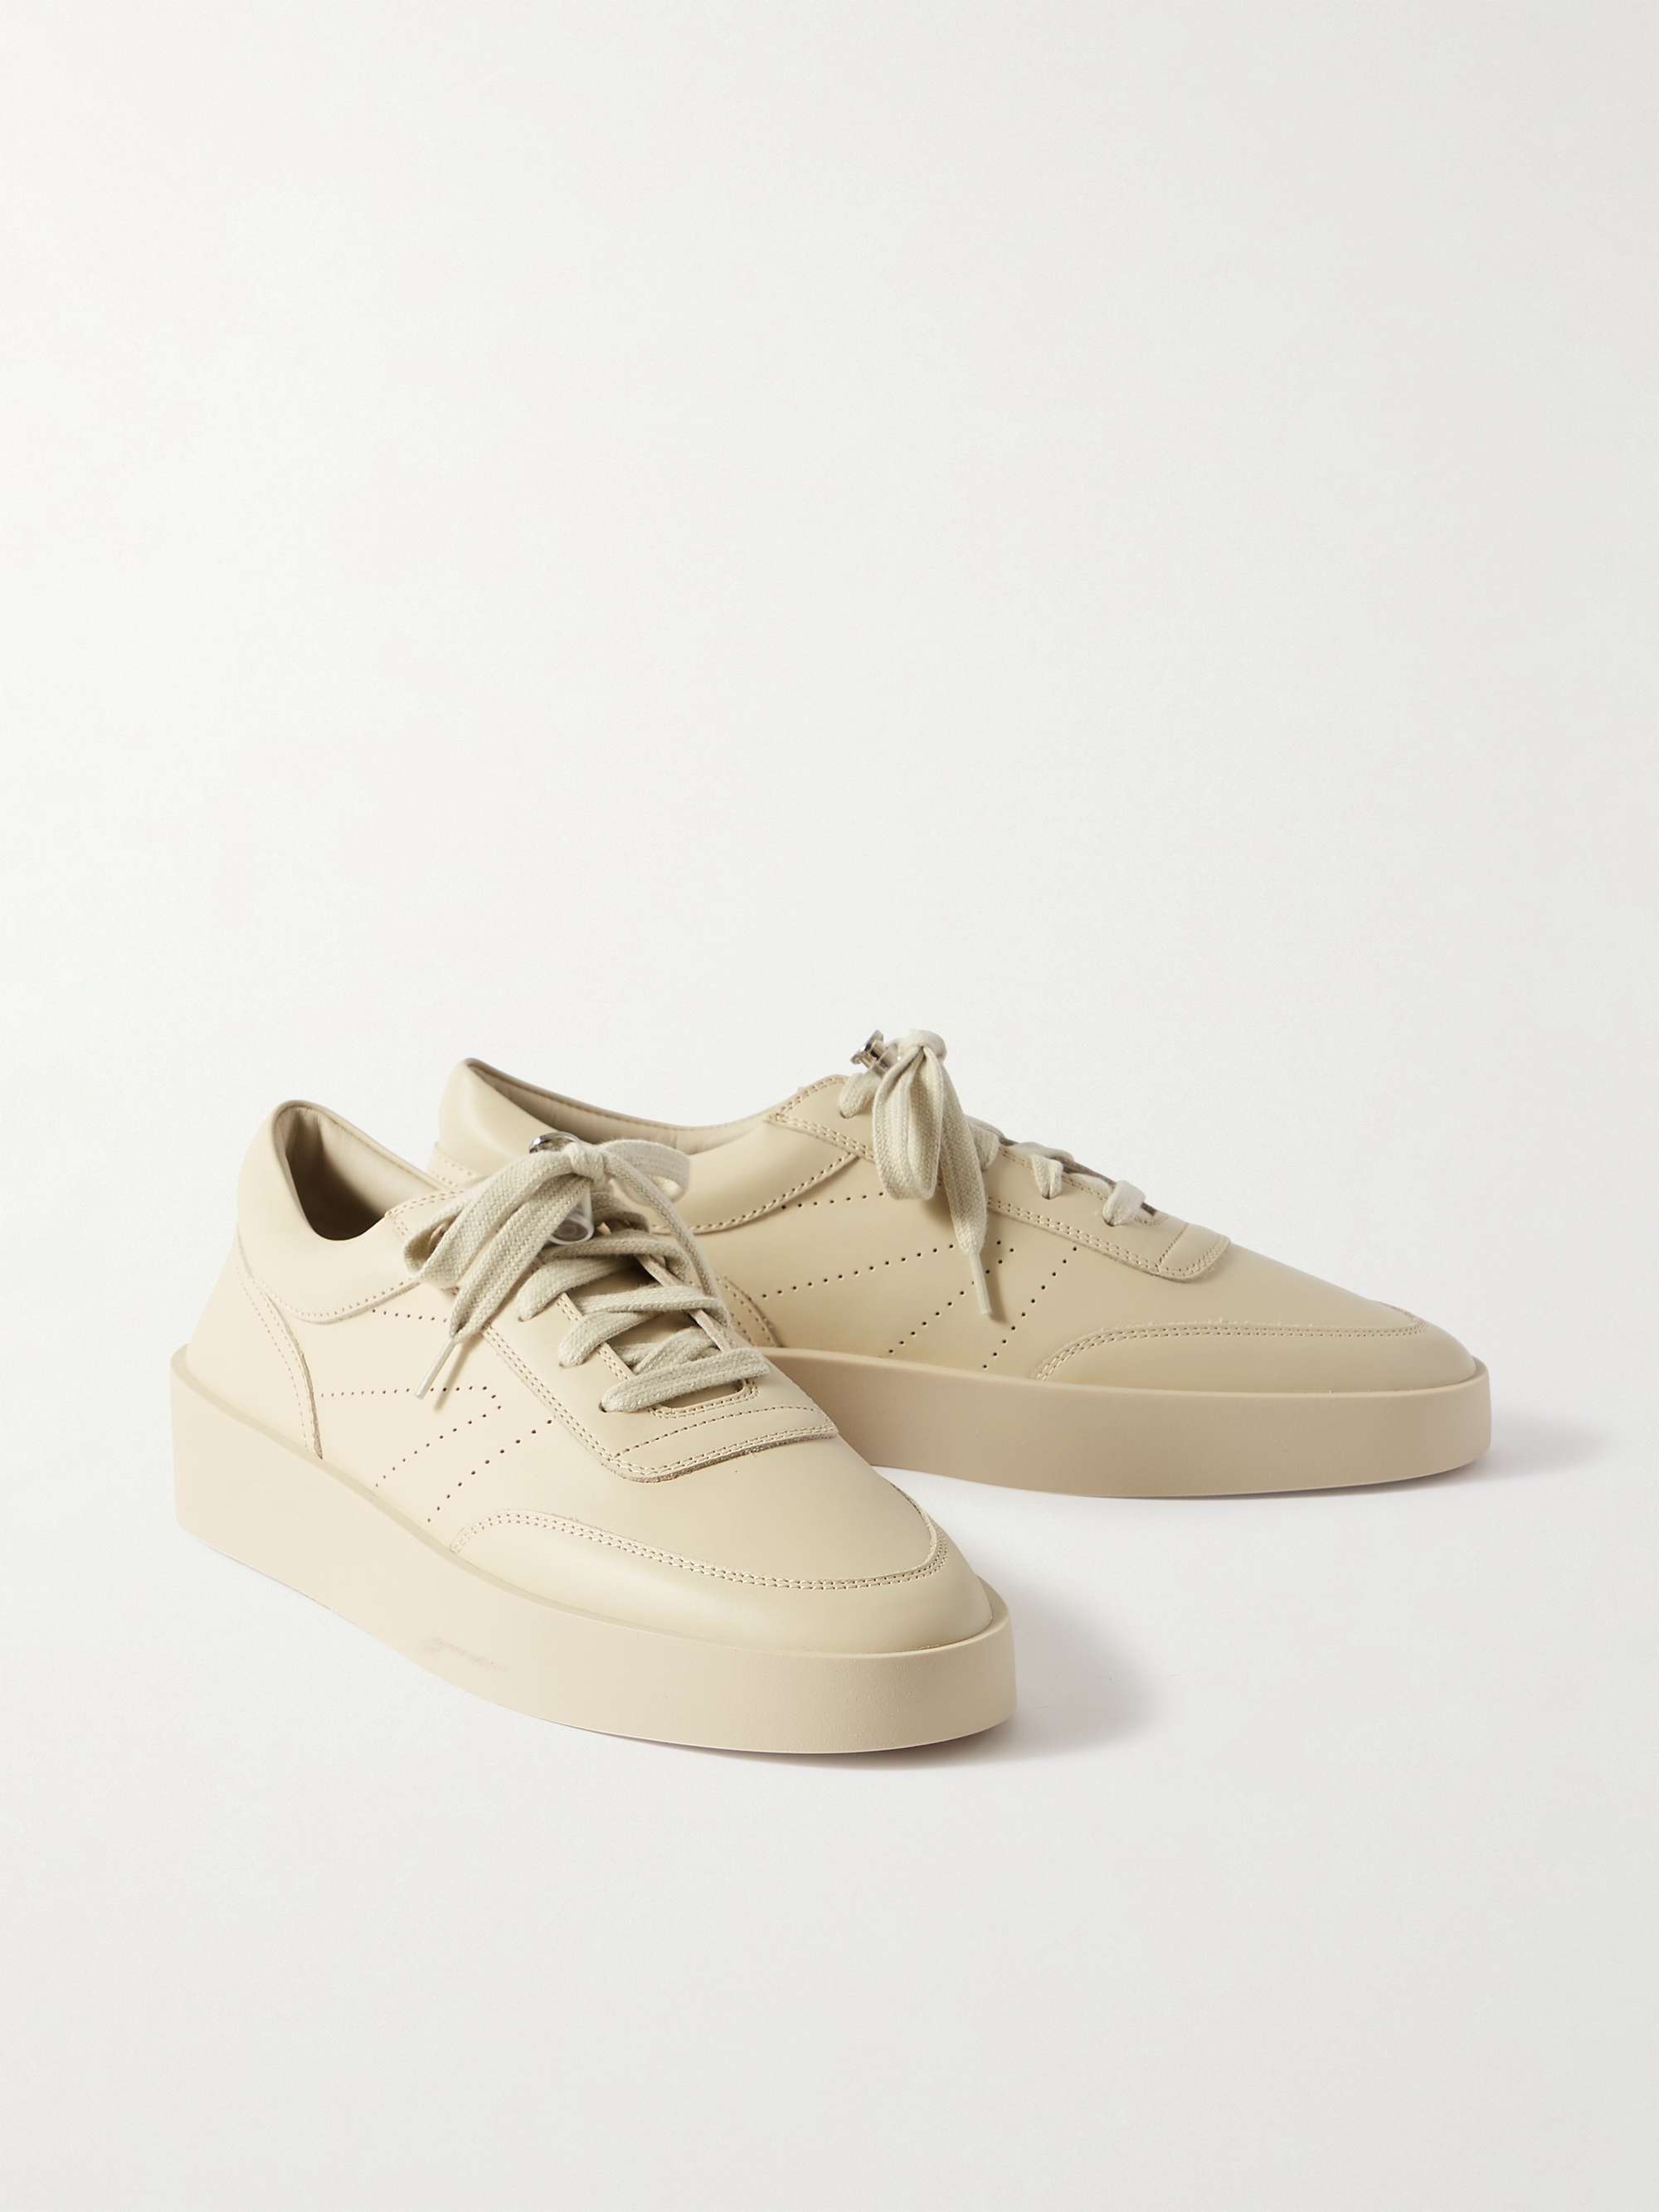 FEAR OF GOD Leather Sneakers